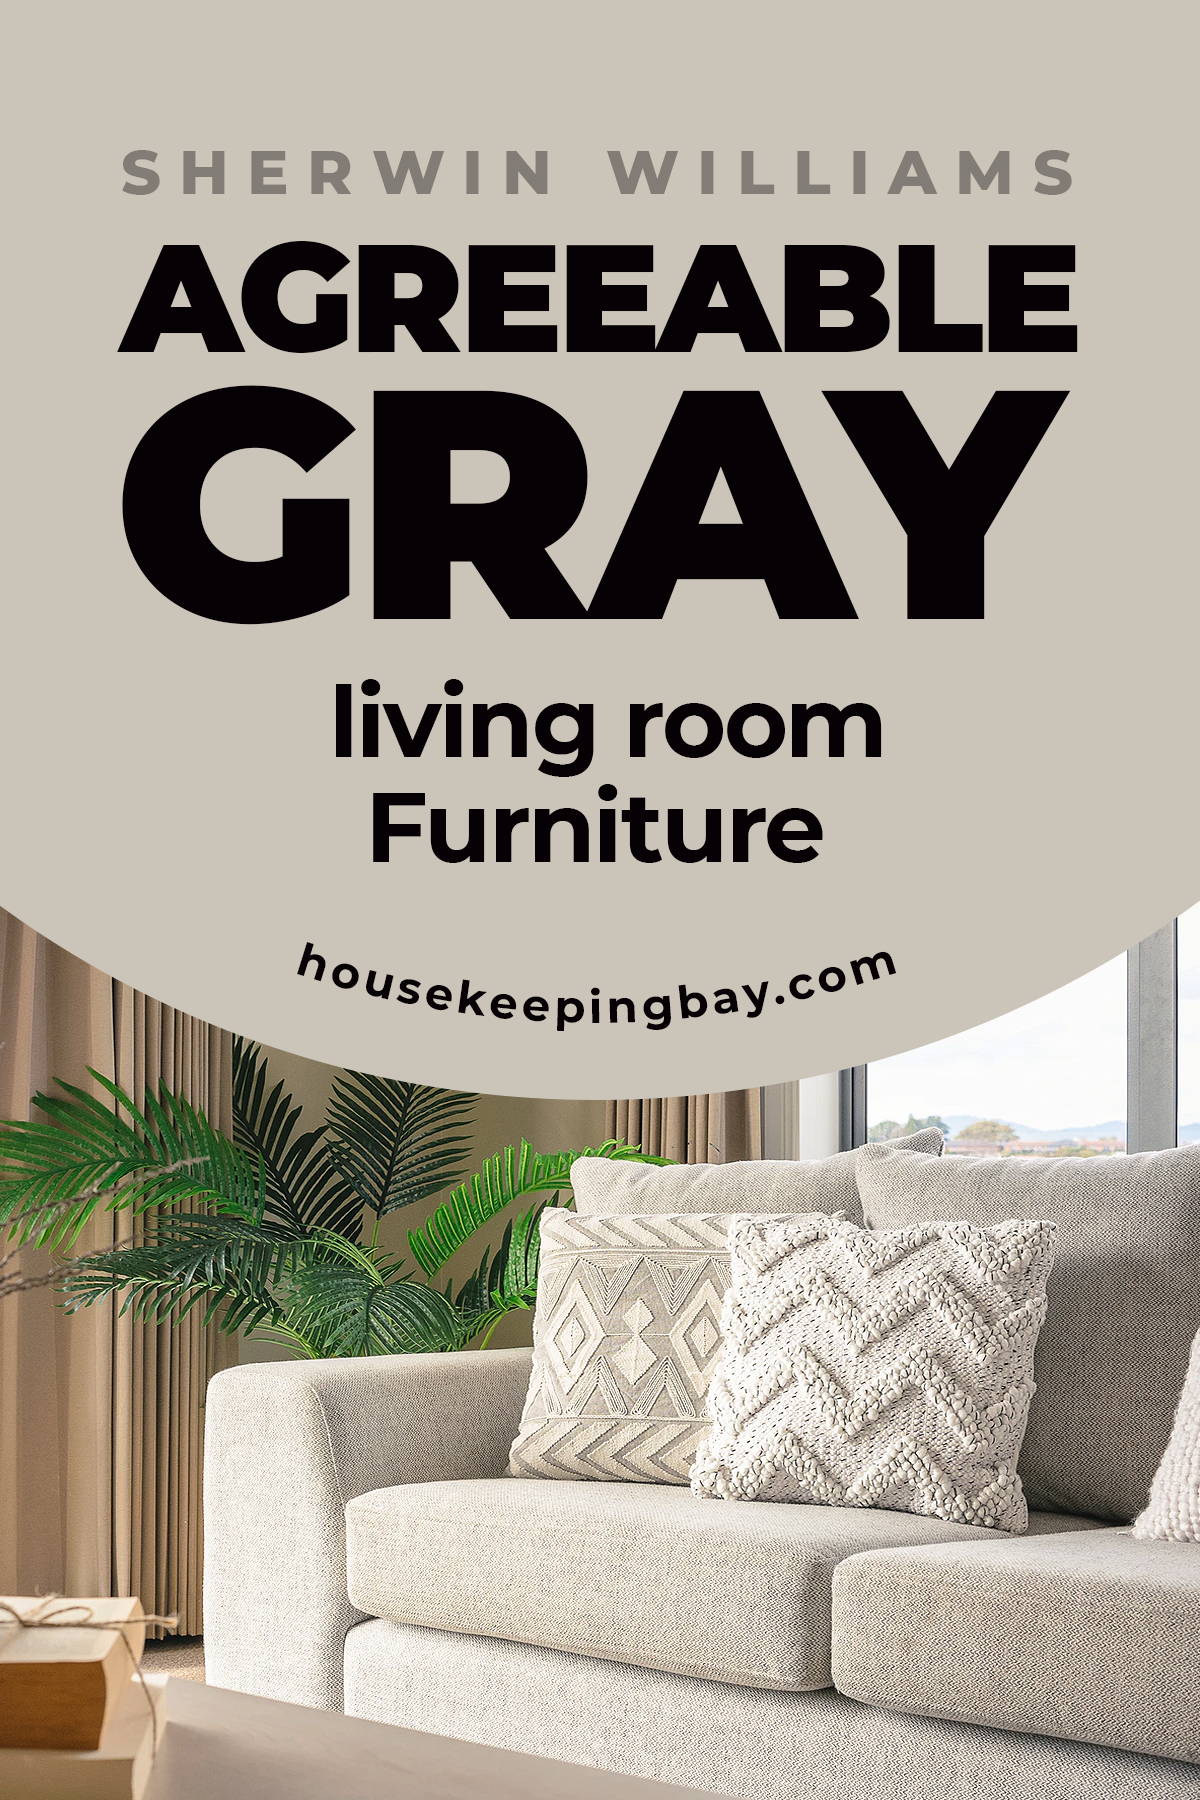 Agreeable Gray living room Furniture